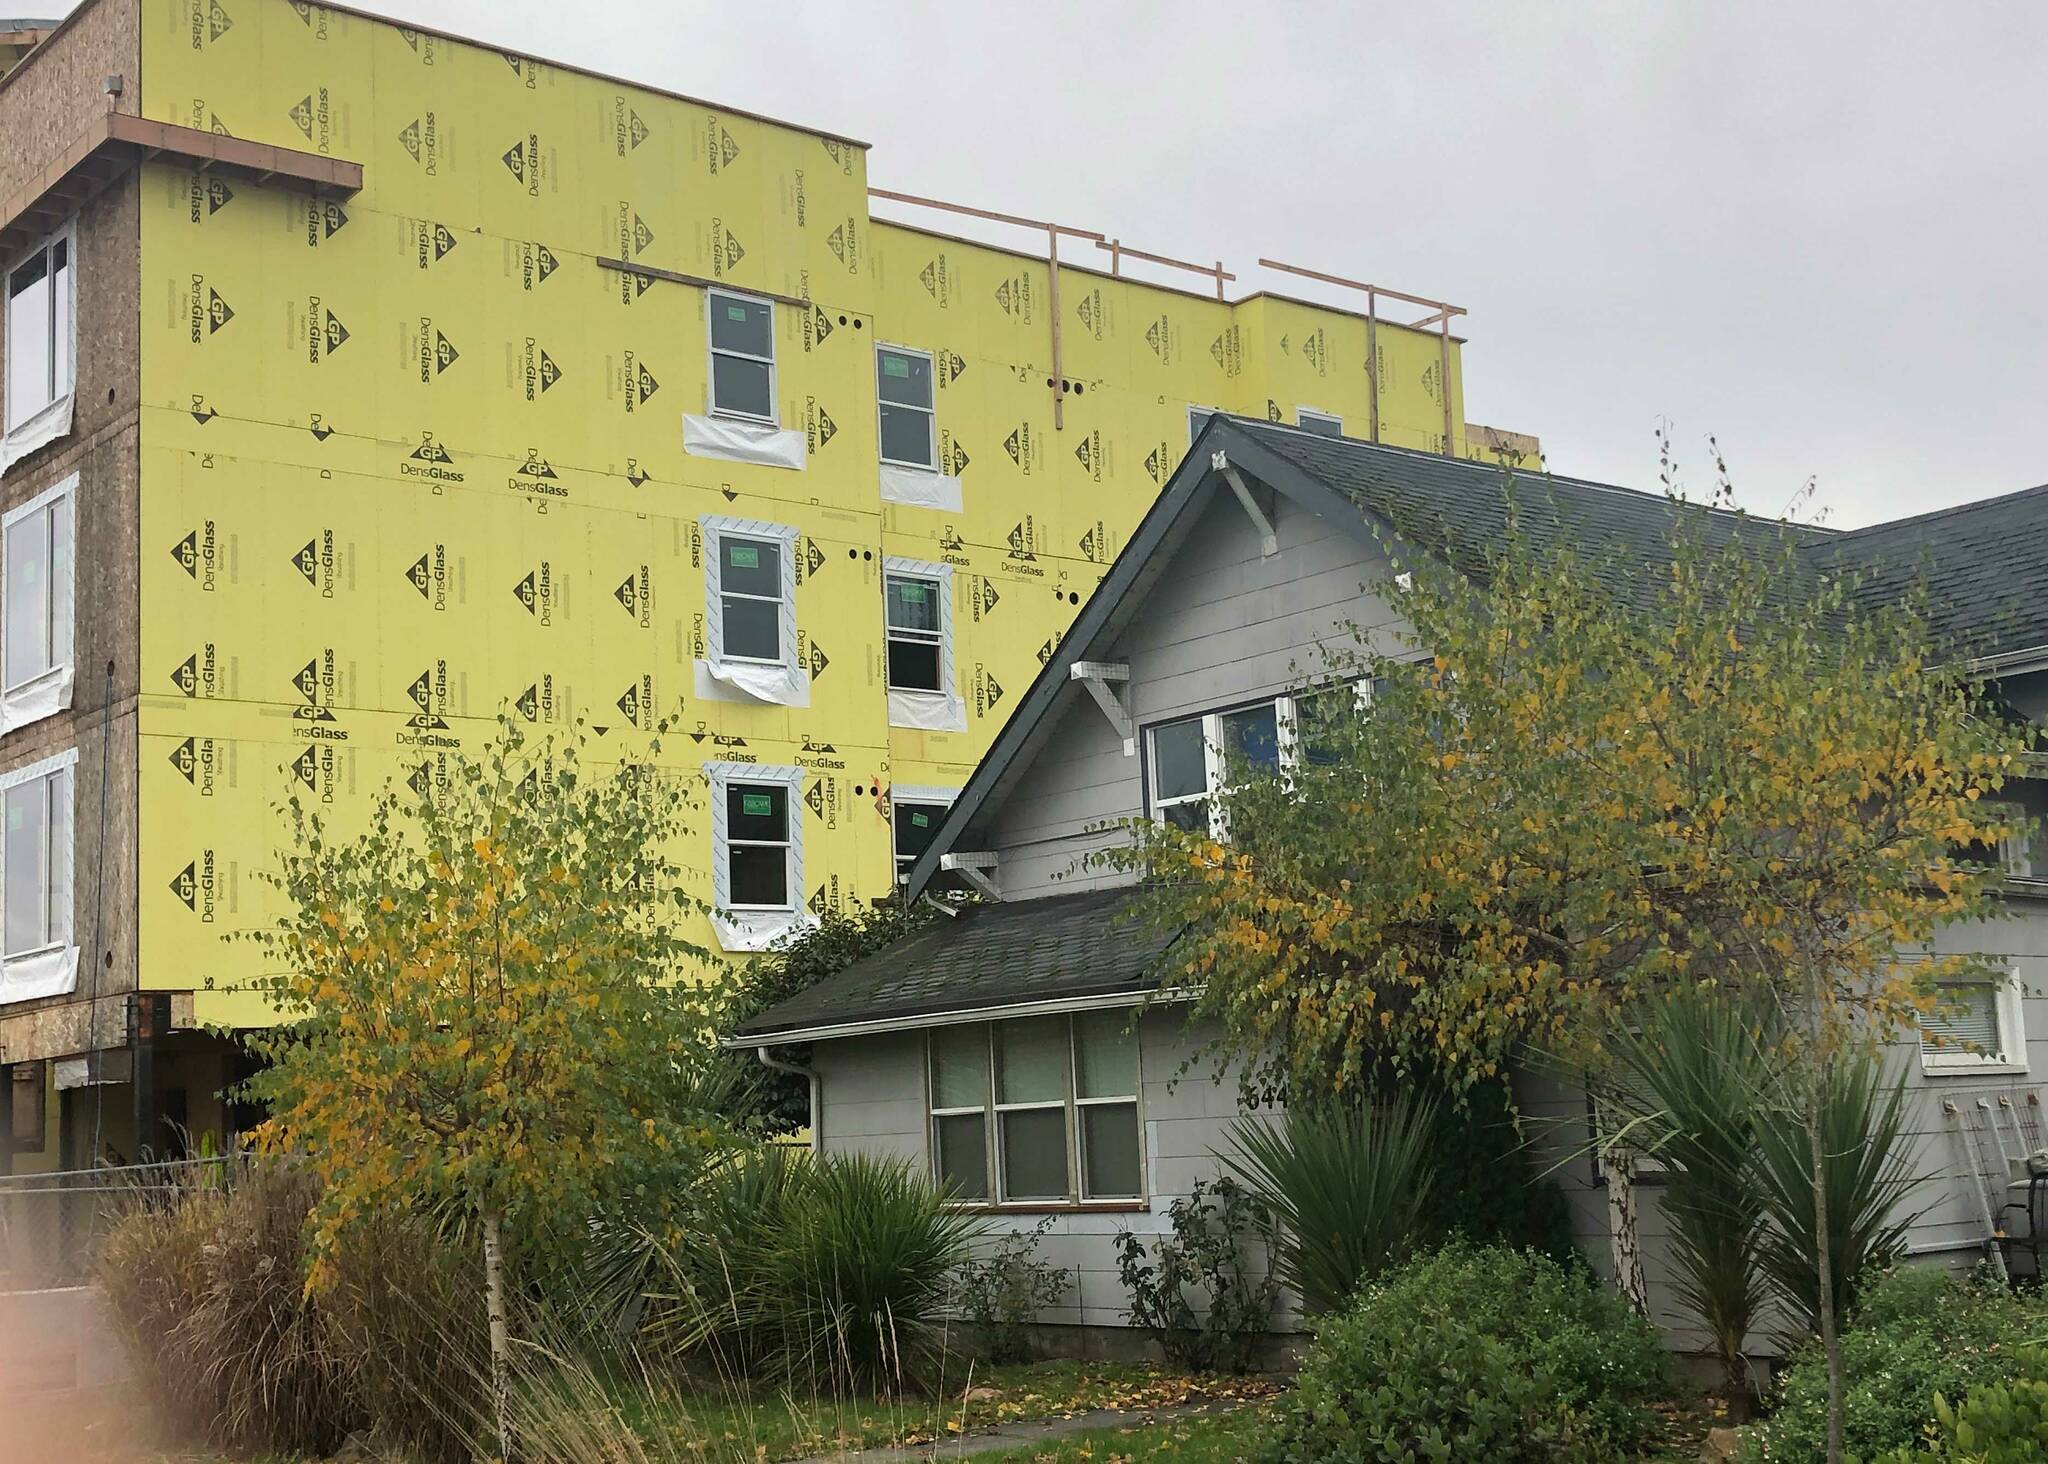 This Tacoma neighborhood is a microcosm of our national housing environment and dilemma; old and new, sprawl and density, renters and owners, all together, and all in flux. (Photo by Morf Morford)